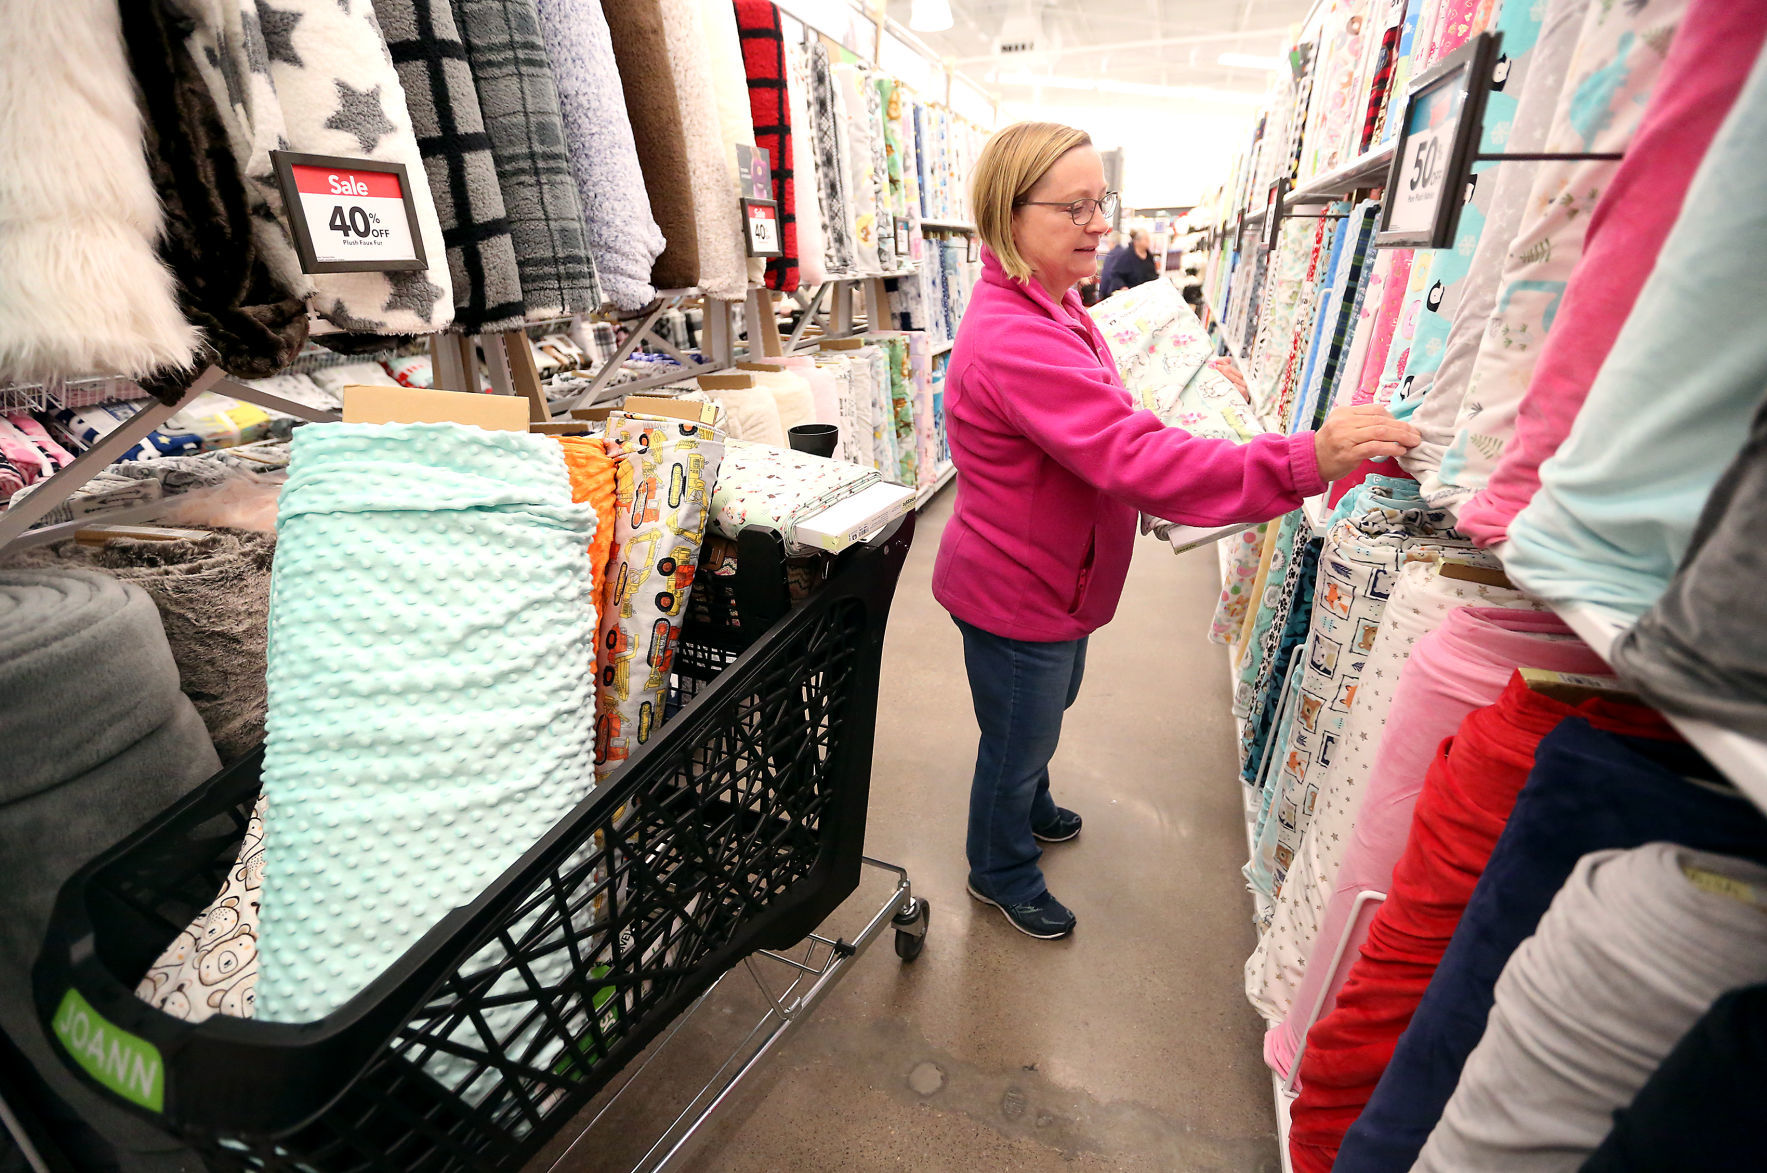 Victoria Timmerman, of Potosi, Wis., shops for fabric at JoAnn in Dubuque on Friday, Oct. 25, 2019. PHOTO CREDIT: JESSICA REILLY